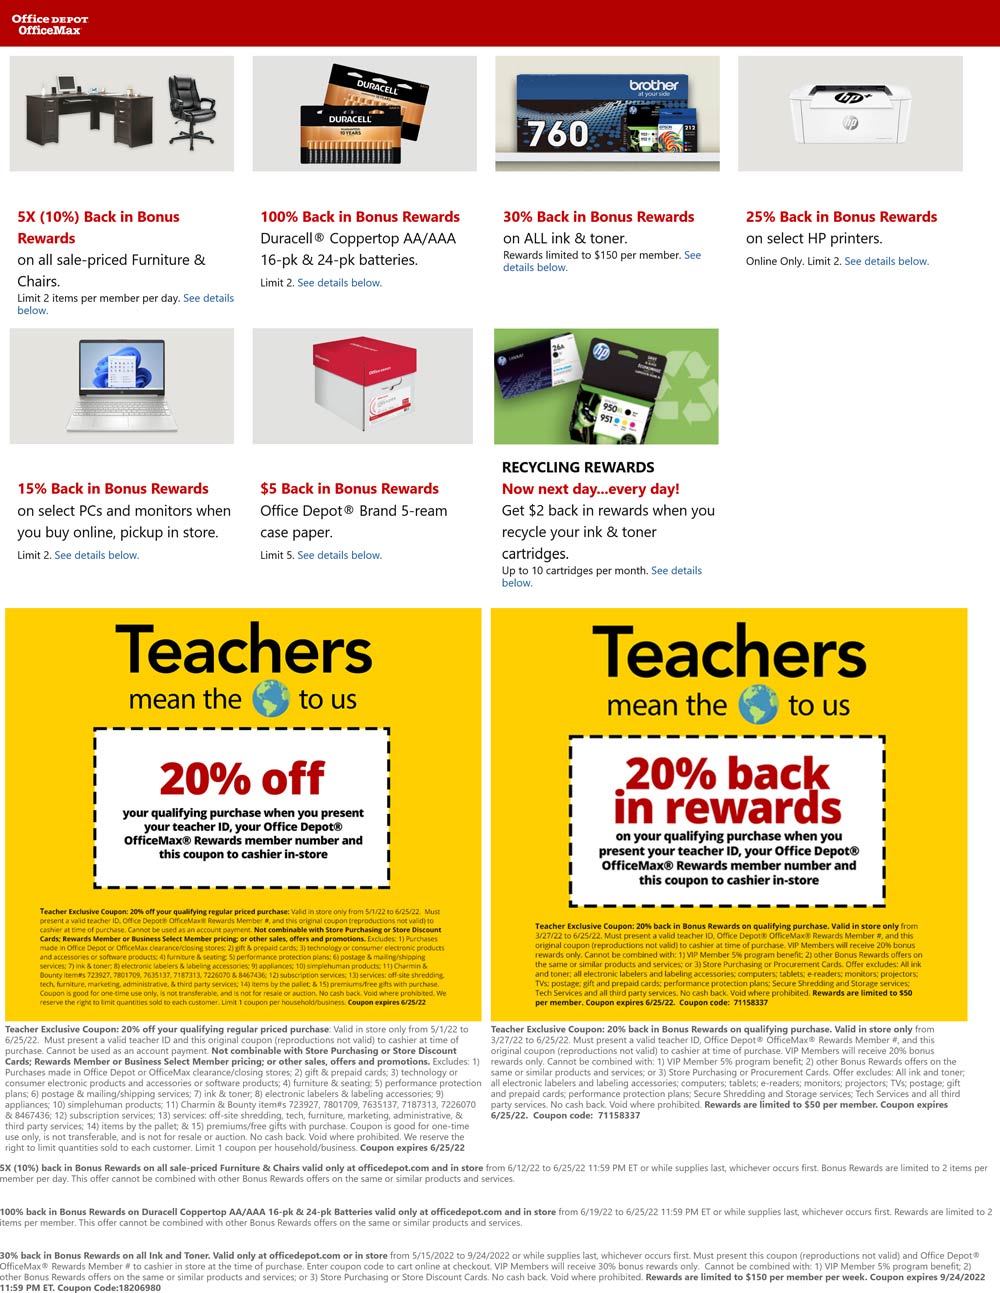 Office Depot stores Coupon  Free Duracell batteries via rewards & teachers enjoy 20% off today at Office Depot & OfficeMax #officedepot 